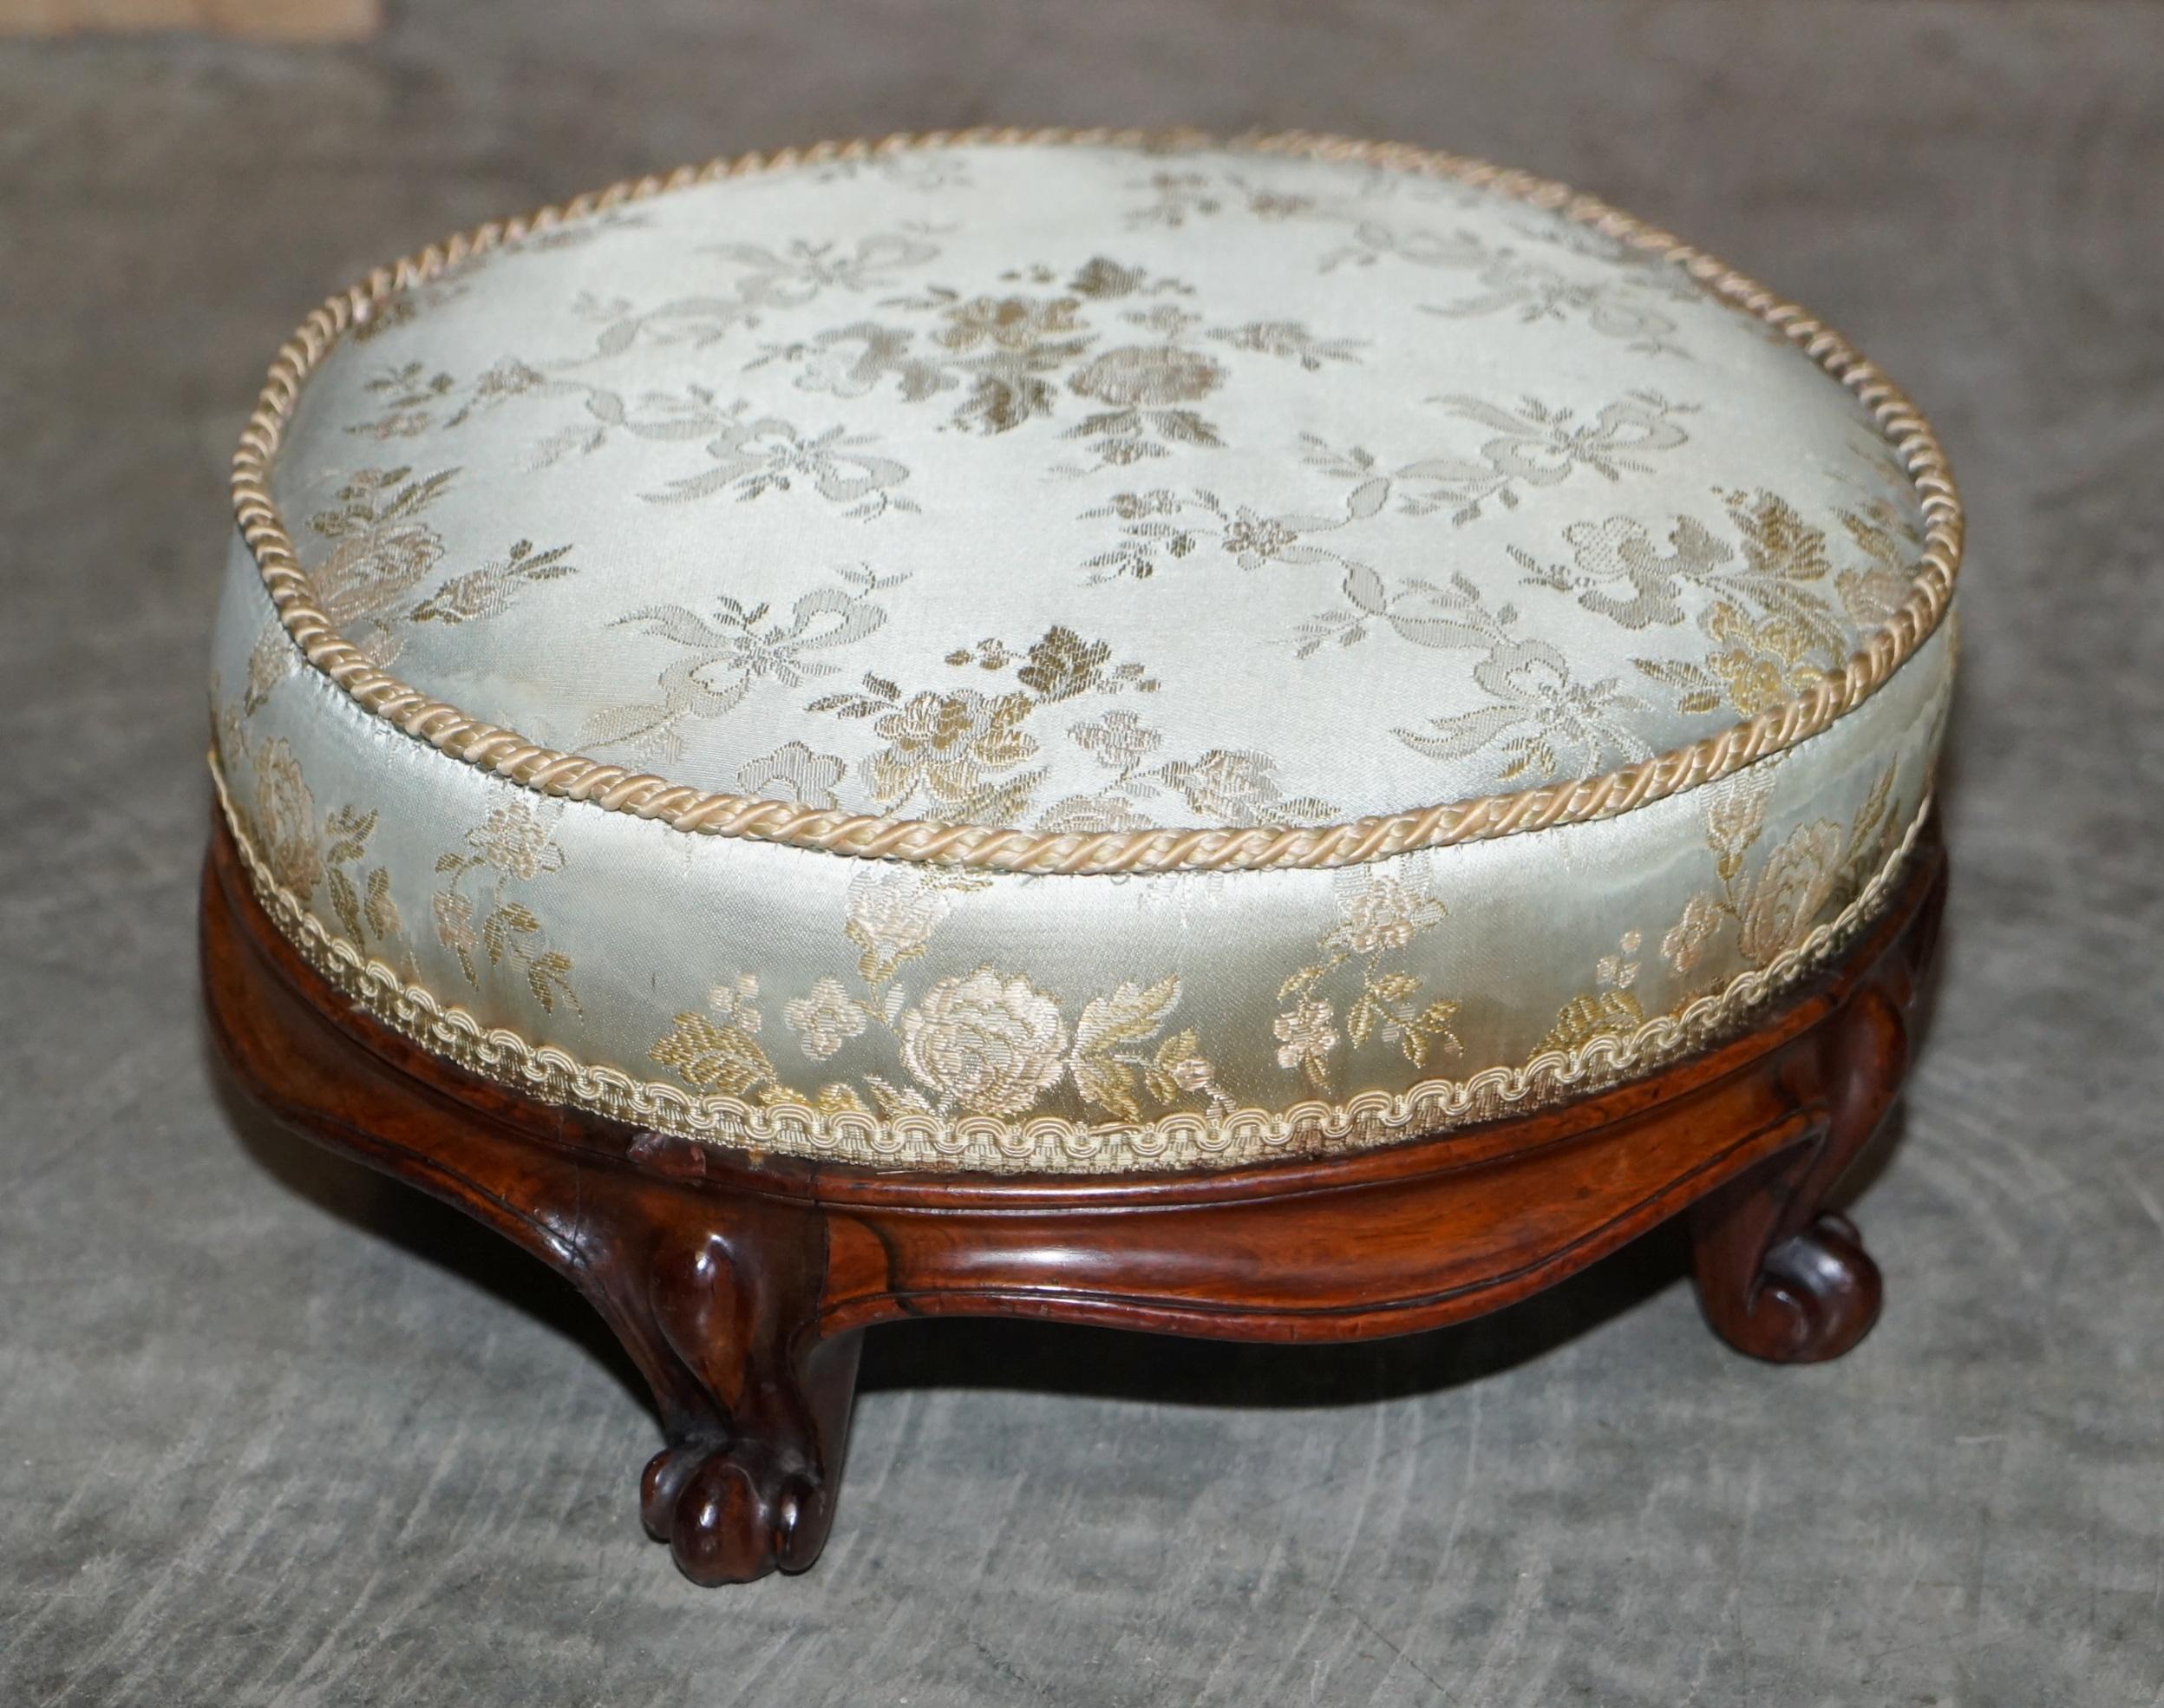 We are delighted to offer this very nice early pair of Regency Rosewood footstools with silk embroidered upholstery 

A good looking and well made pair. These types of stools were designed to be used with wingback armchairs, the idea being, when